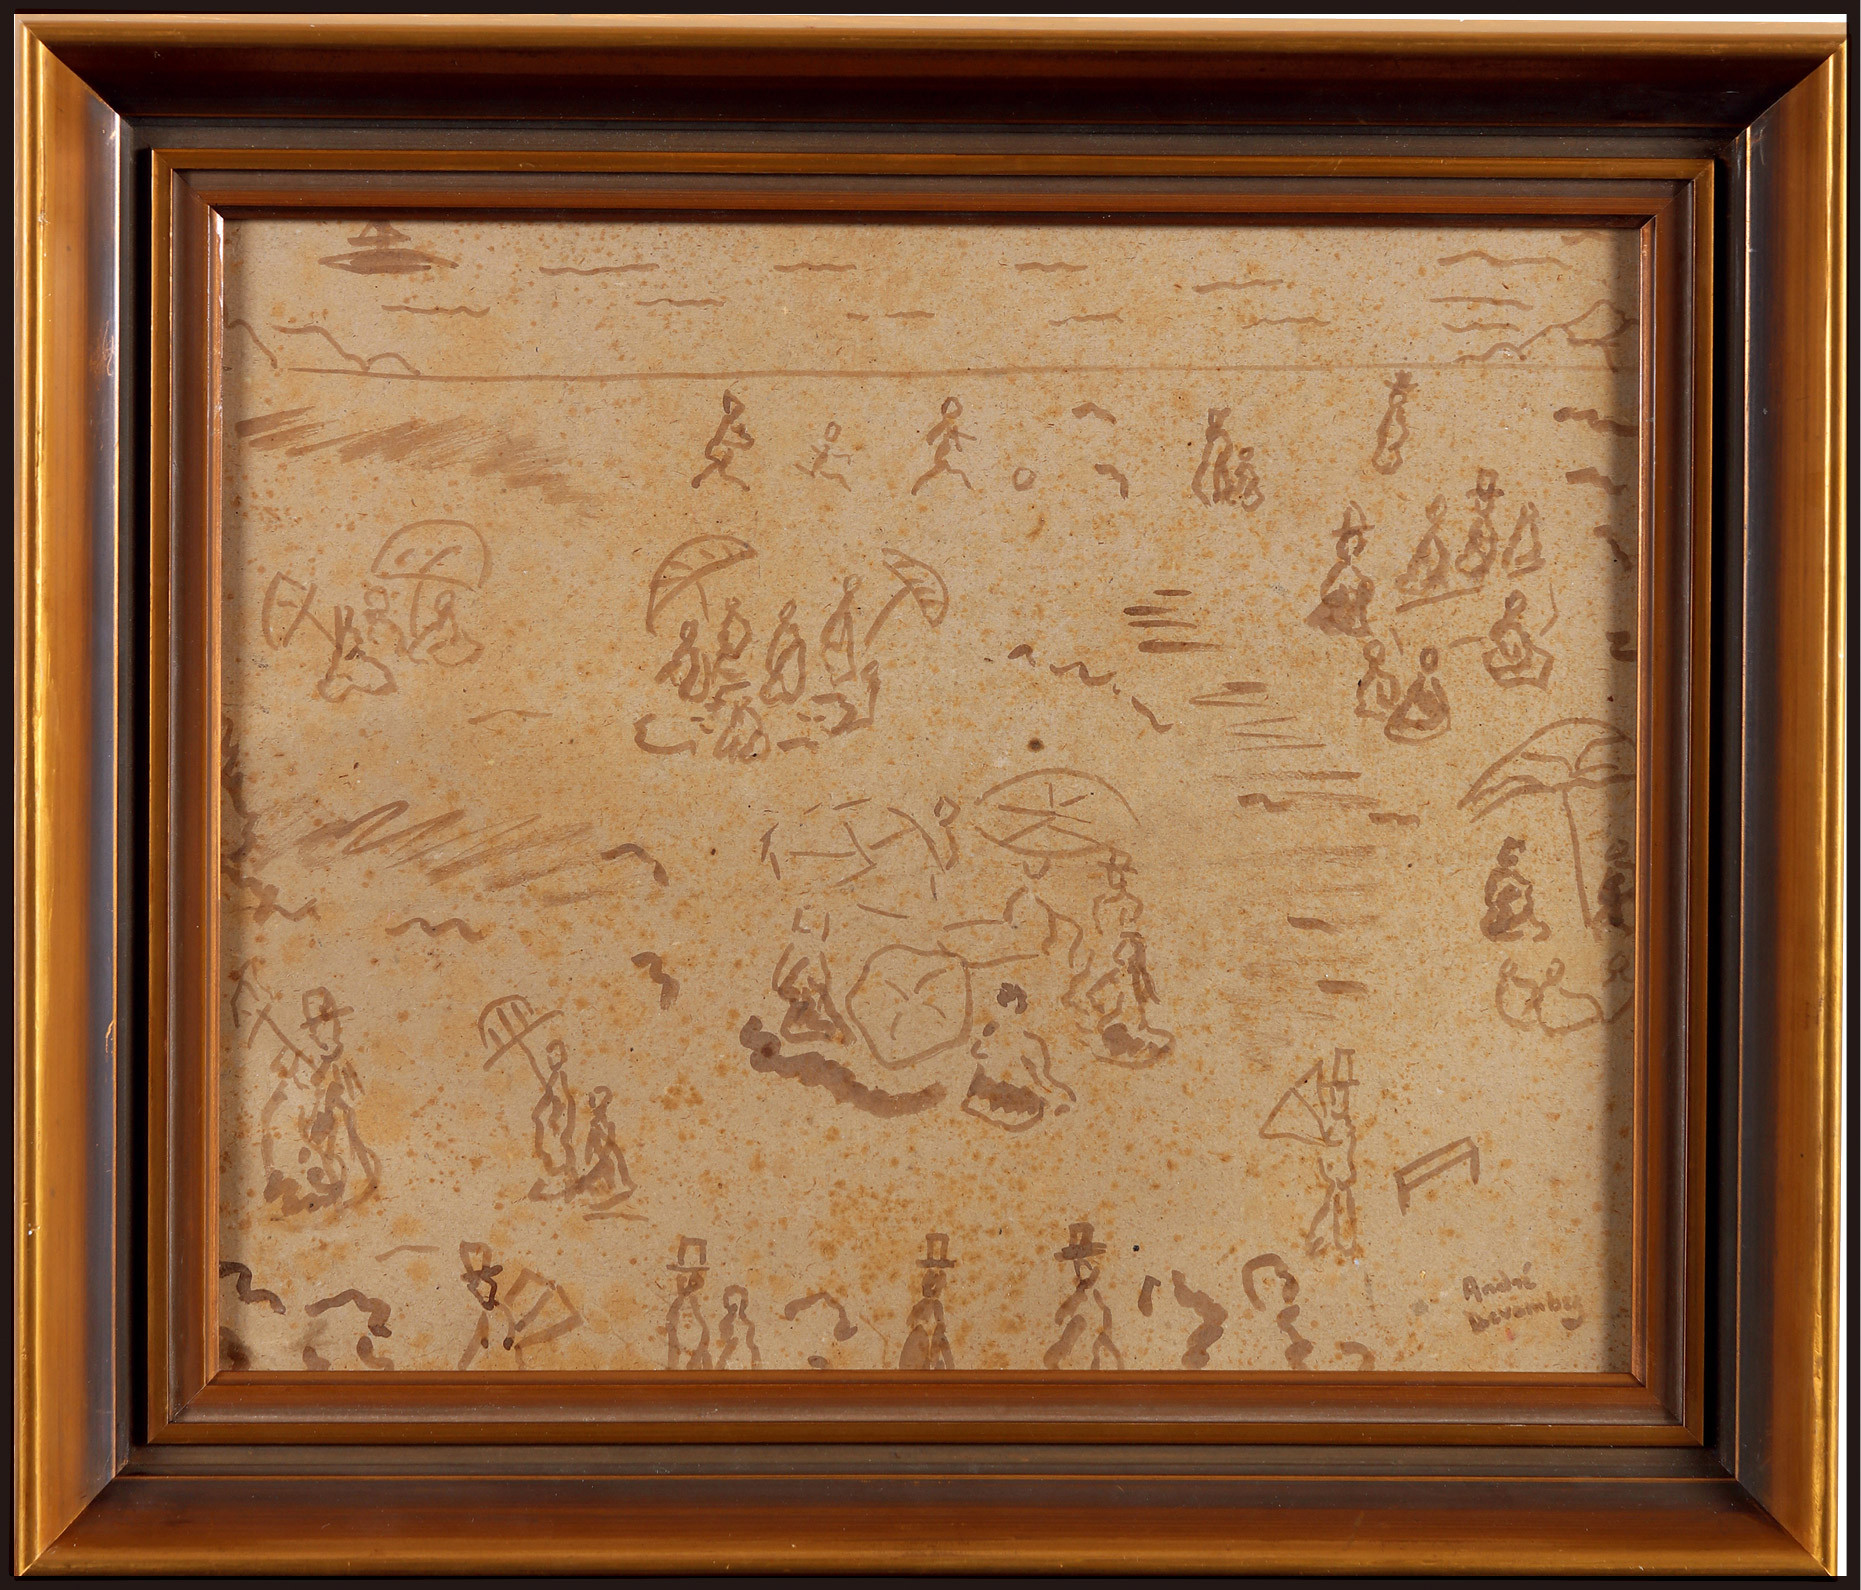 The sketch “A lively beach” by André Devambez, “Lv Sibai’s mentor and a famous French painter”, with a certificate